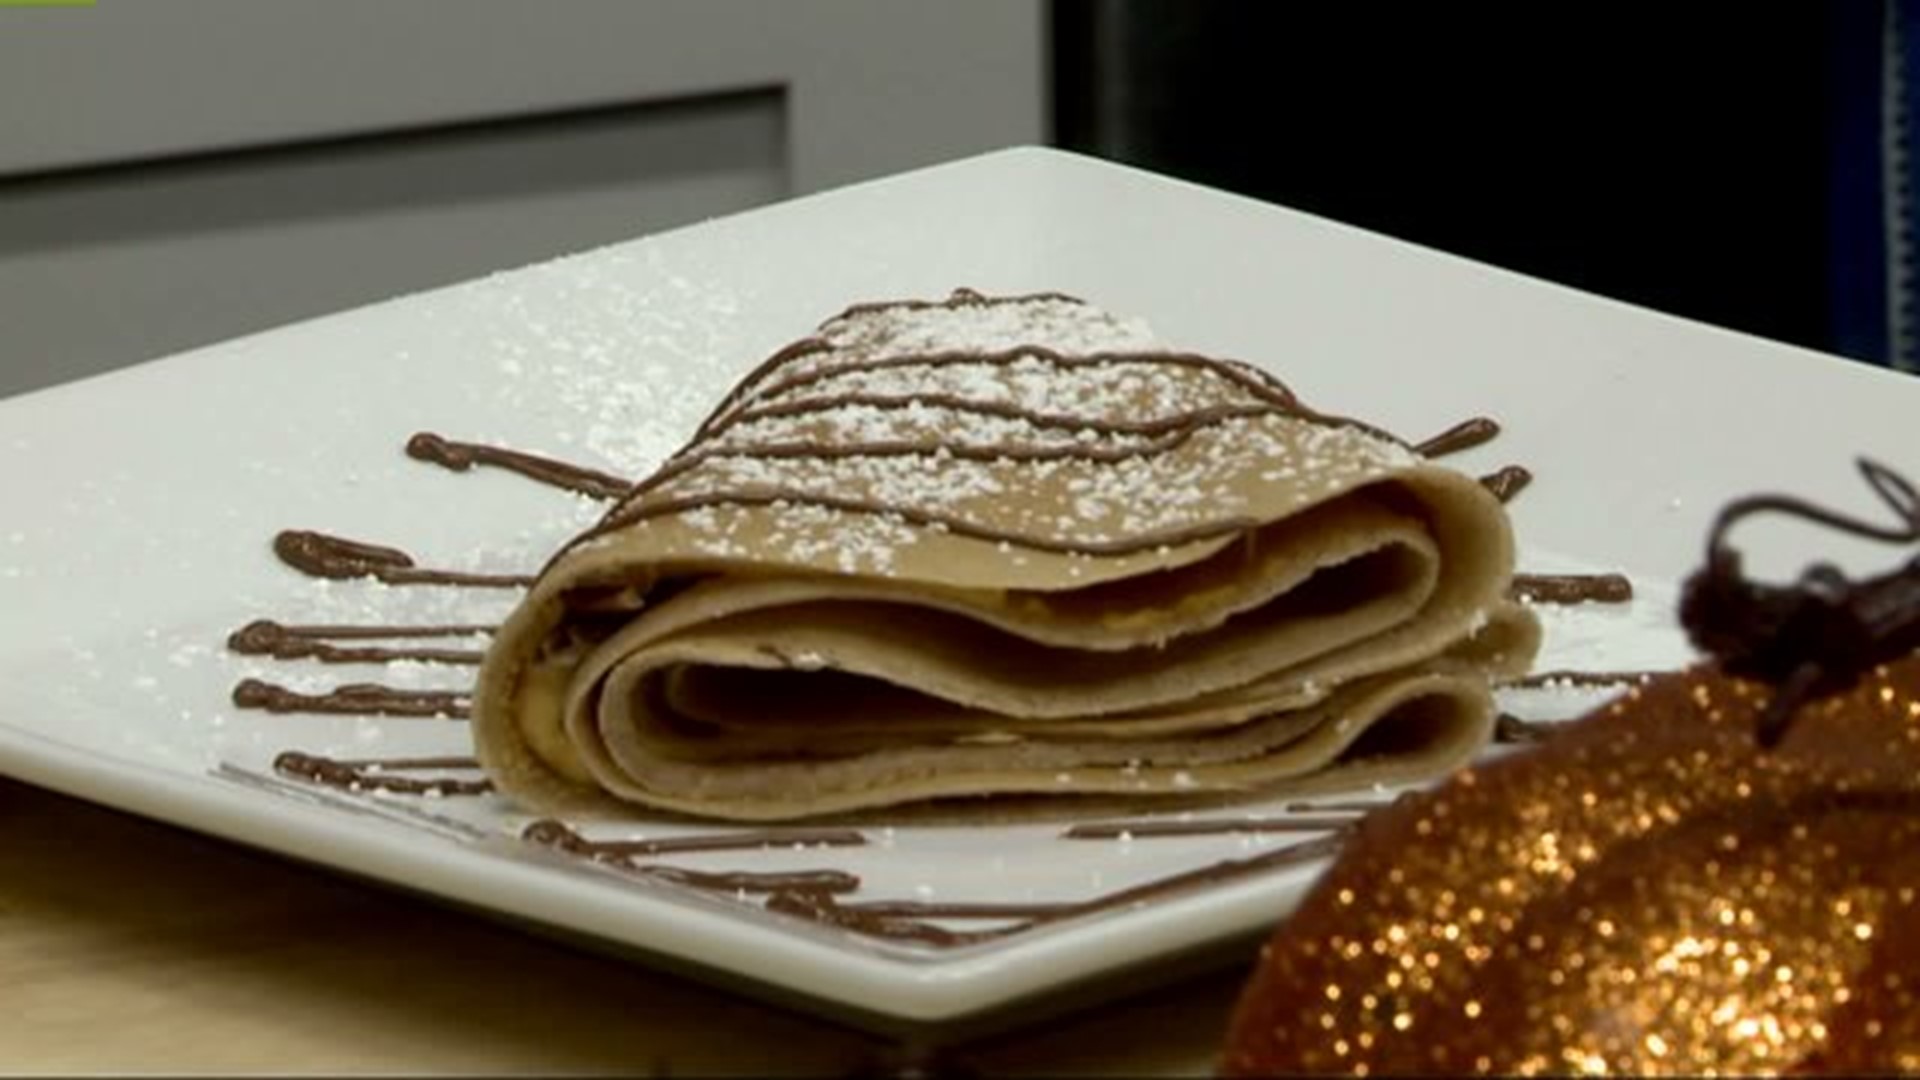 Yet another way to enjoy the flavor of the season  in crepes!